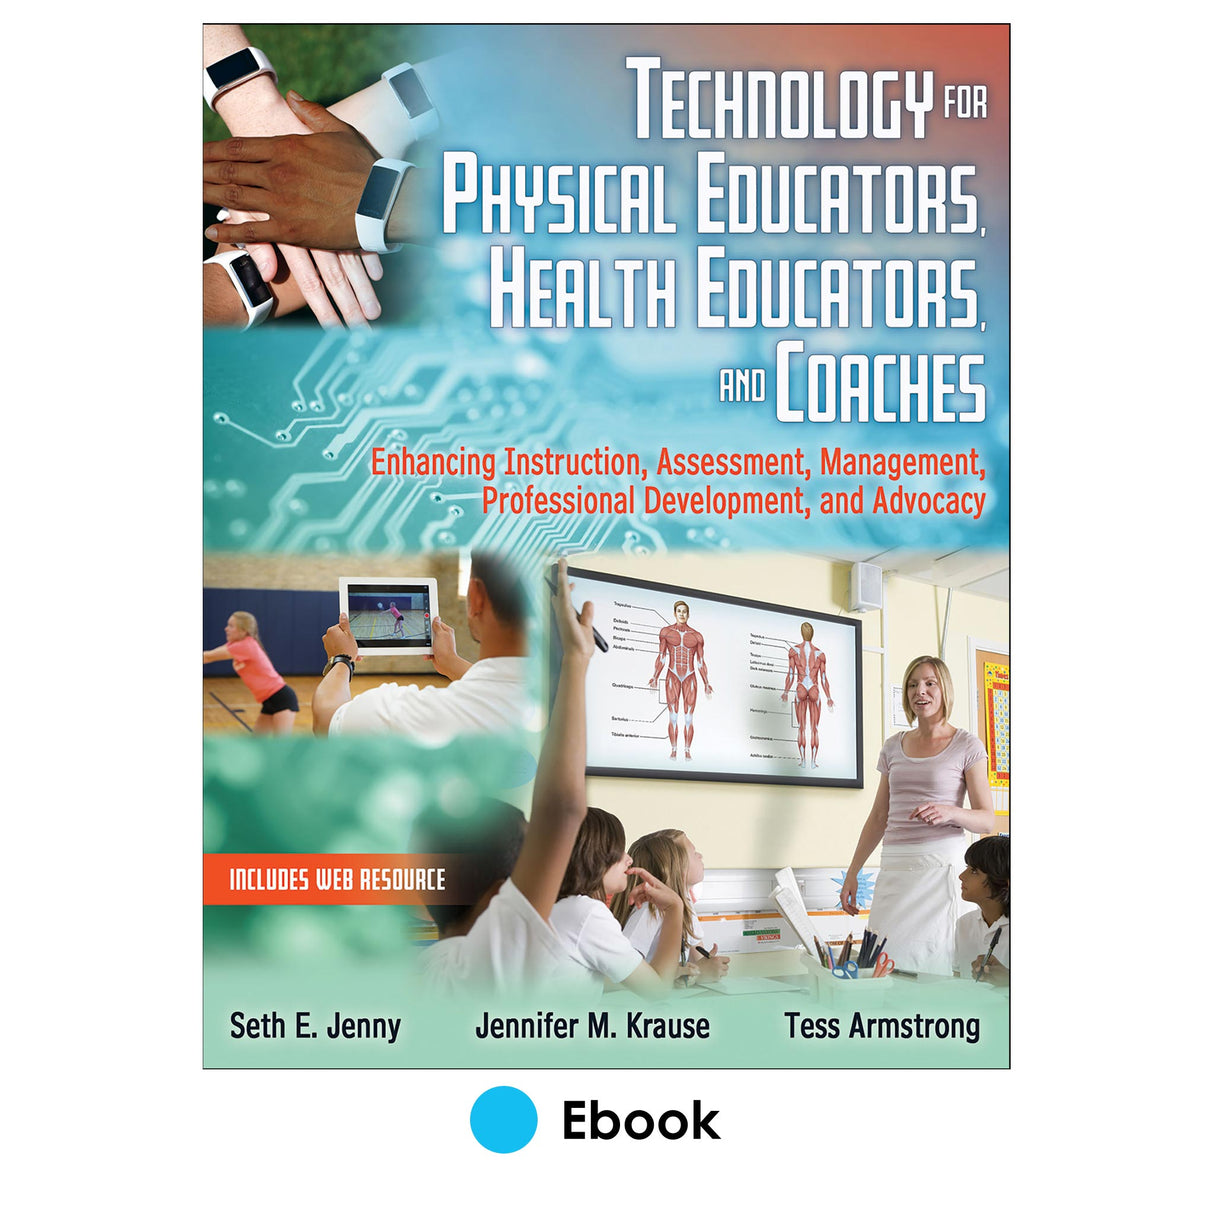 Technology for Physical Educators, Health Educators, and Coaches epub With Web Resource